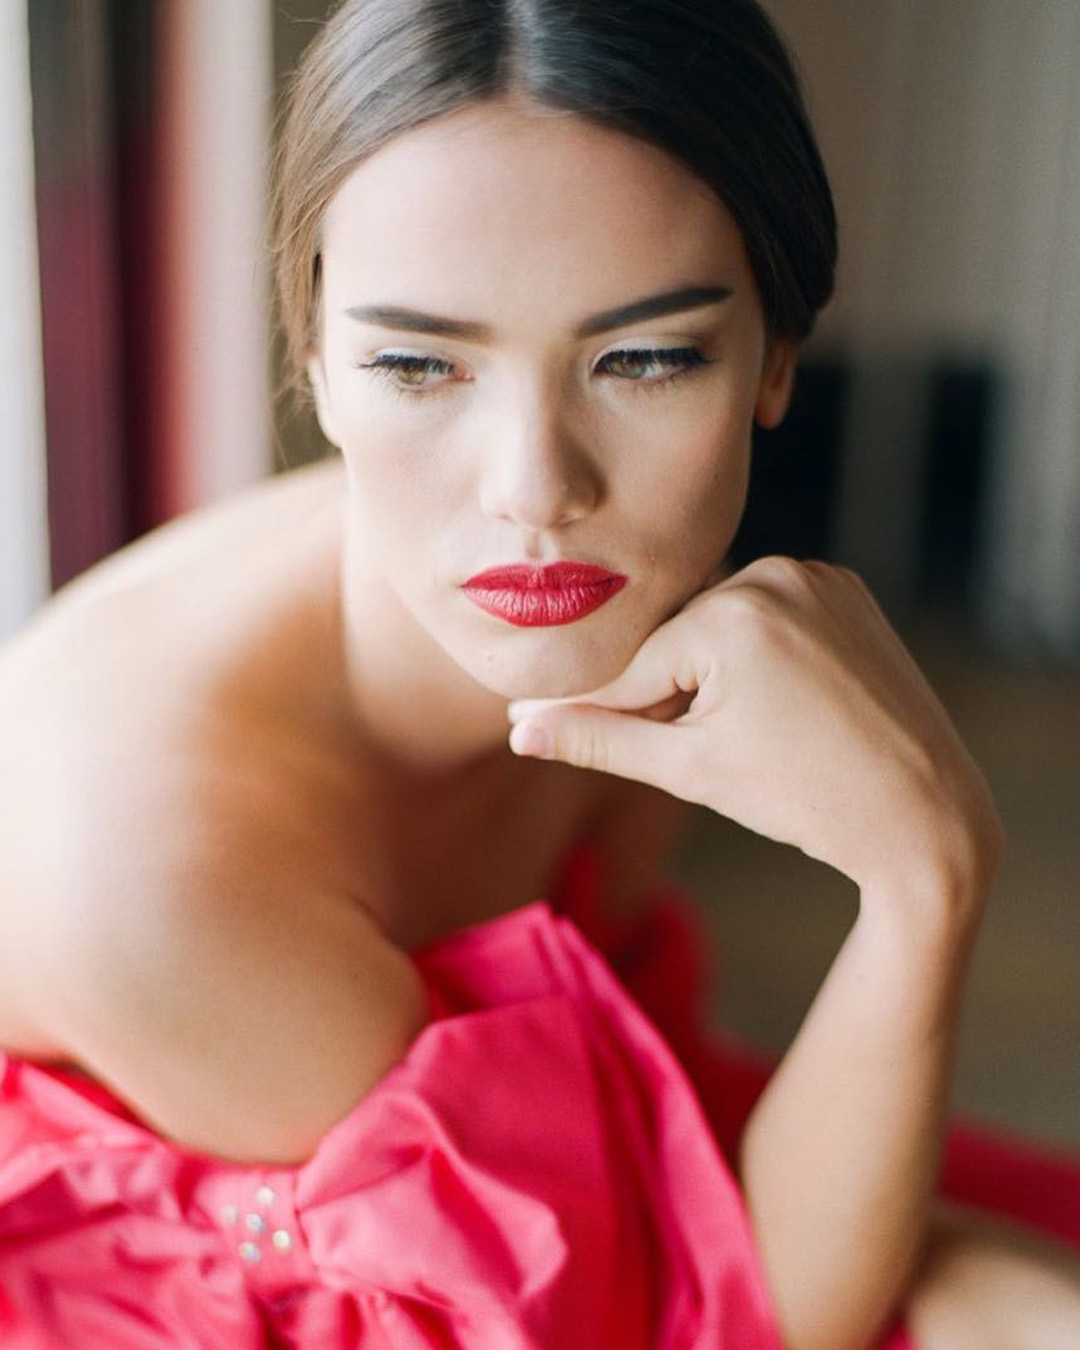 engagement photo makeup natural with bold red lips janelleingram